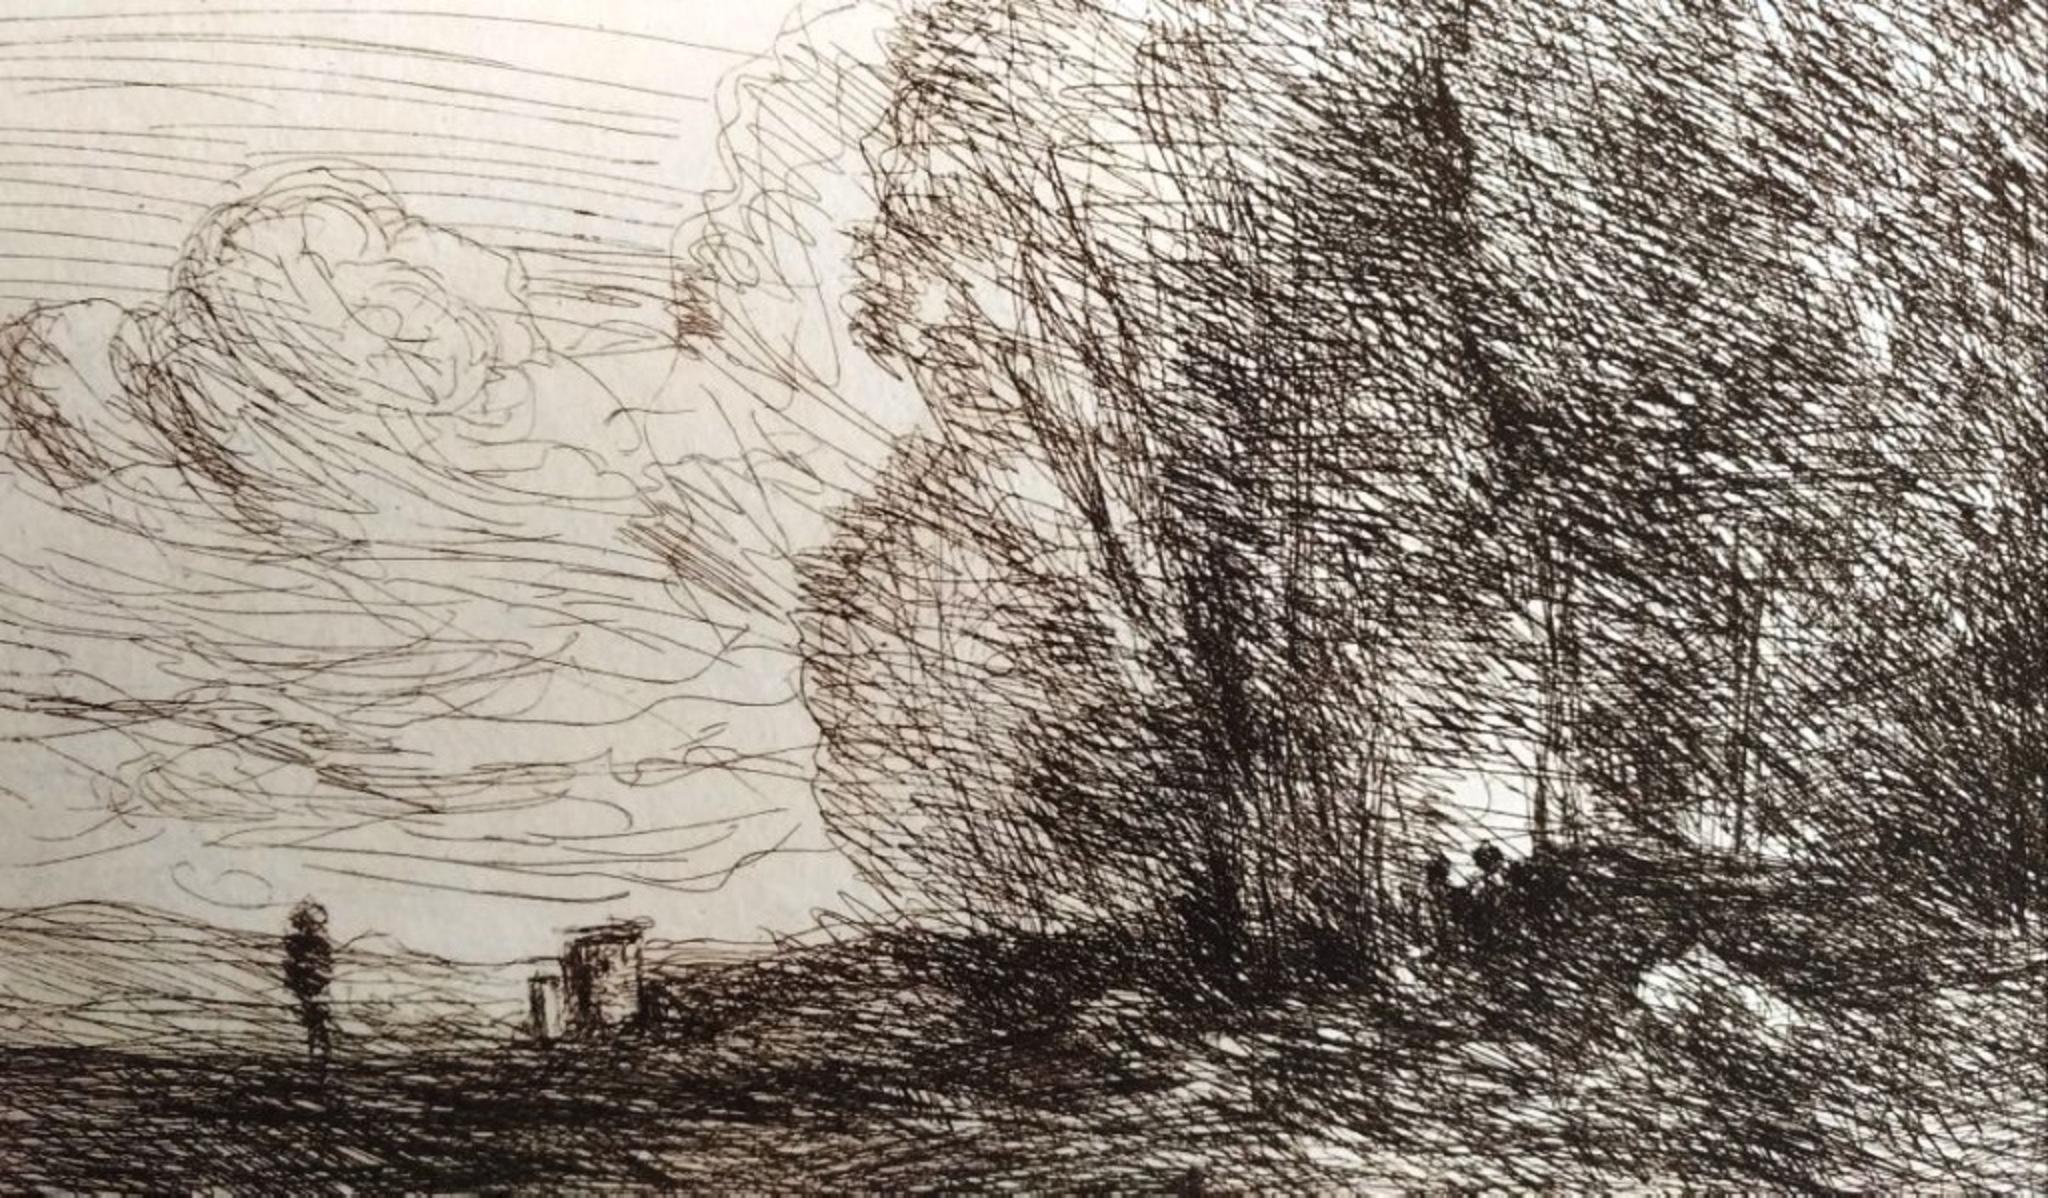 Landscape #4 -  Etching by Camille Corot - 1850s - Print by Jean-Baptiste-Camille Corot